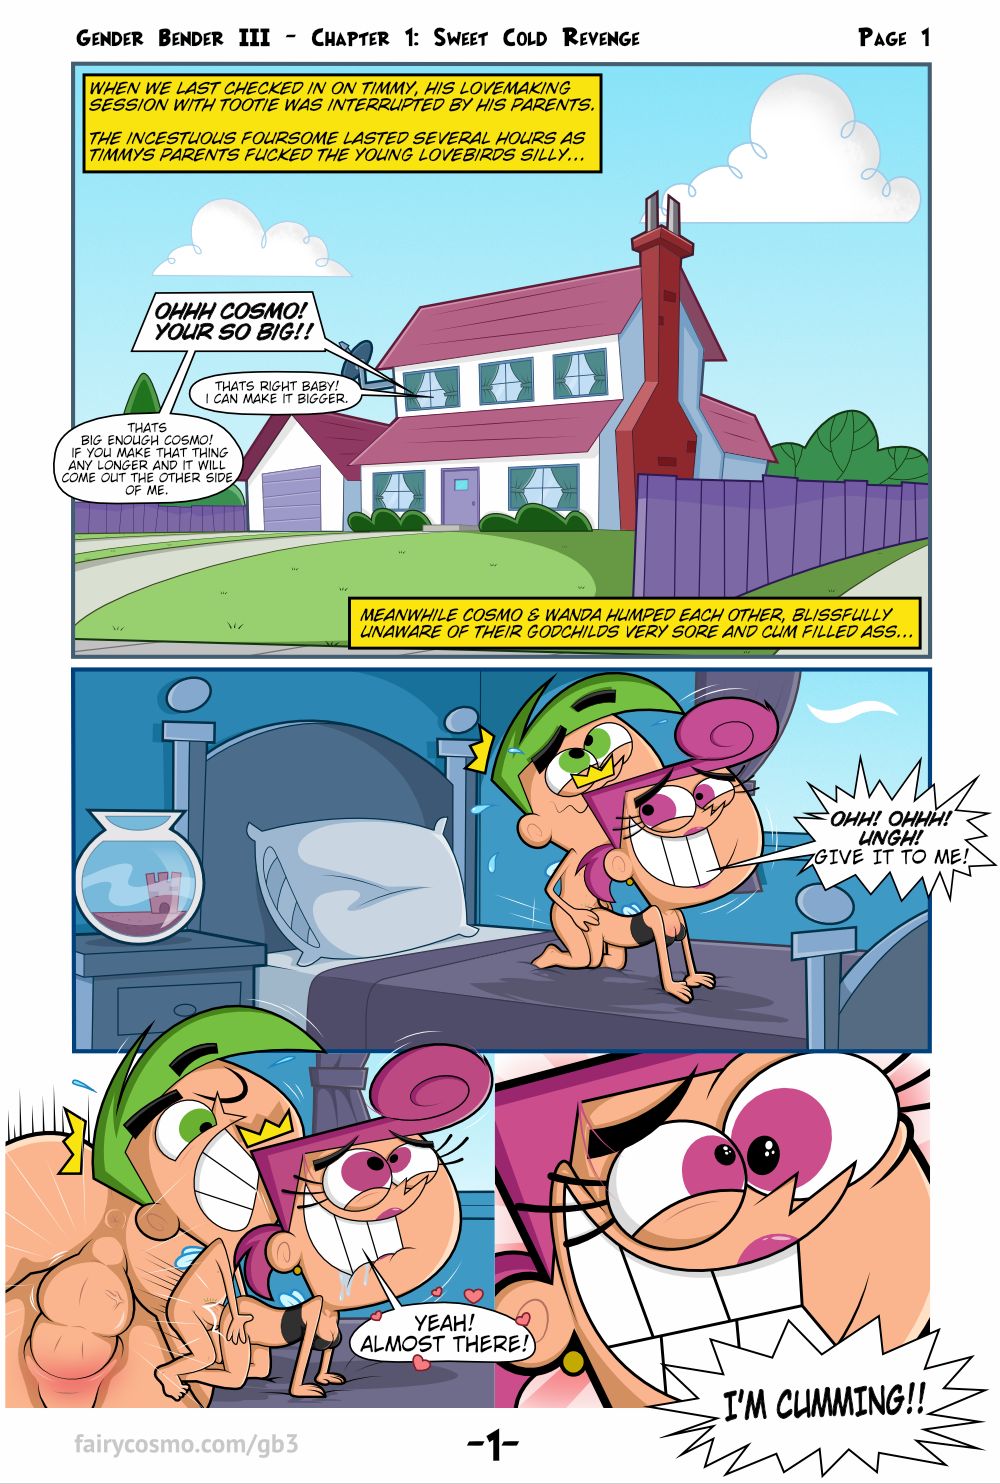 Fairly Oddparents Sex Change Porn - Fairly OddParents- Gender Bender III (Fairycosmo) Â» Porn Comics Galleries